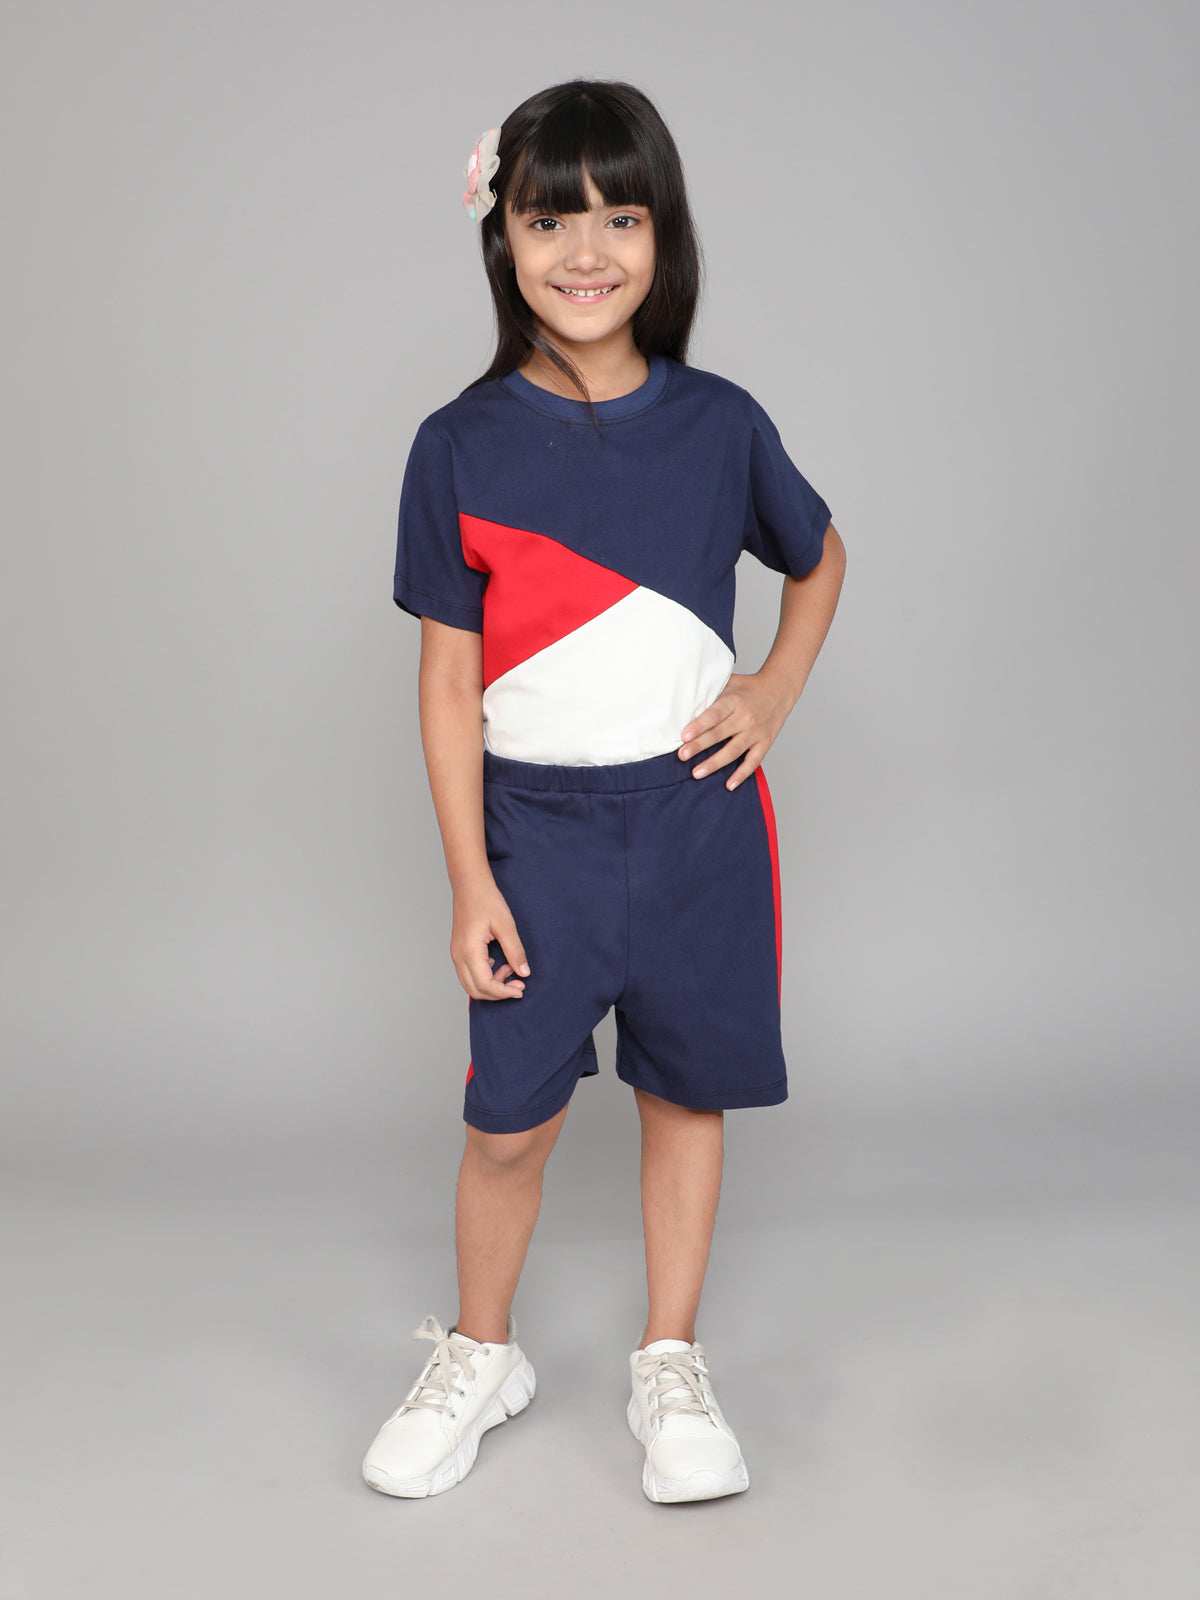 Colour Blocked Half sleeves Co-ord Sets for Girls